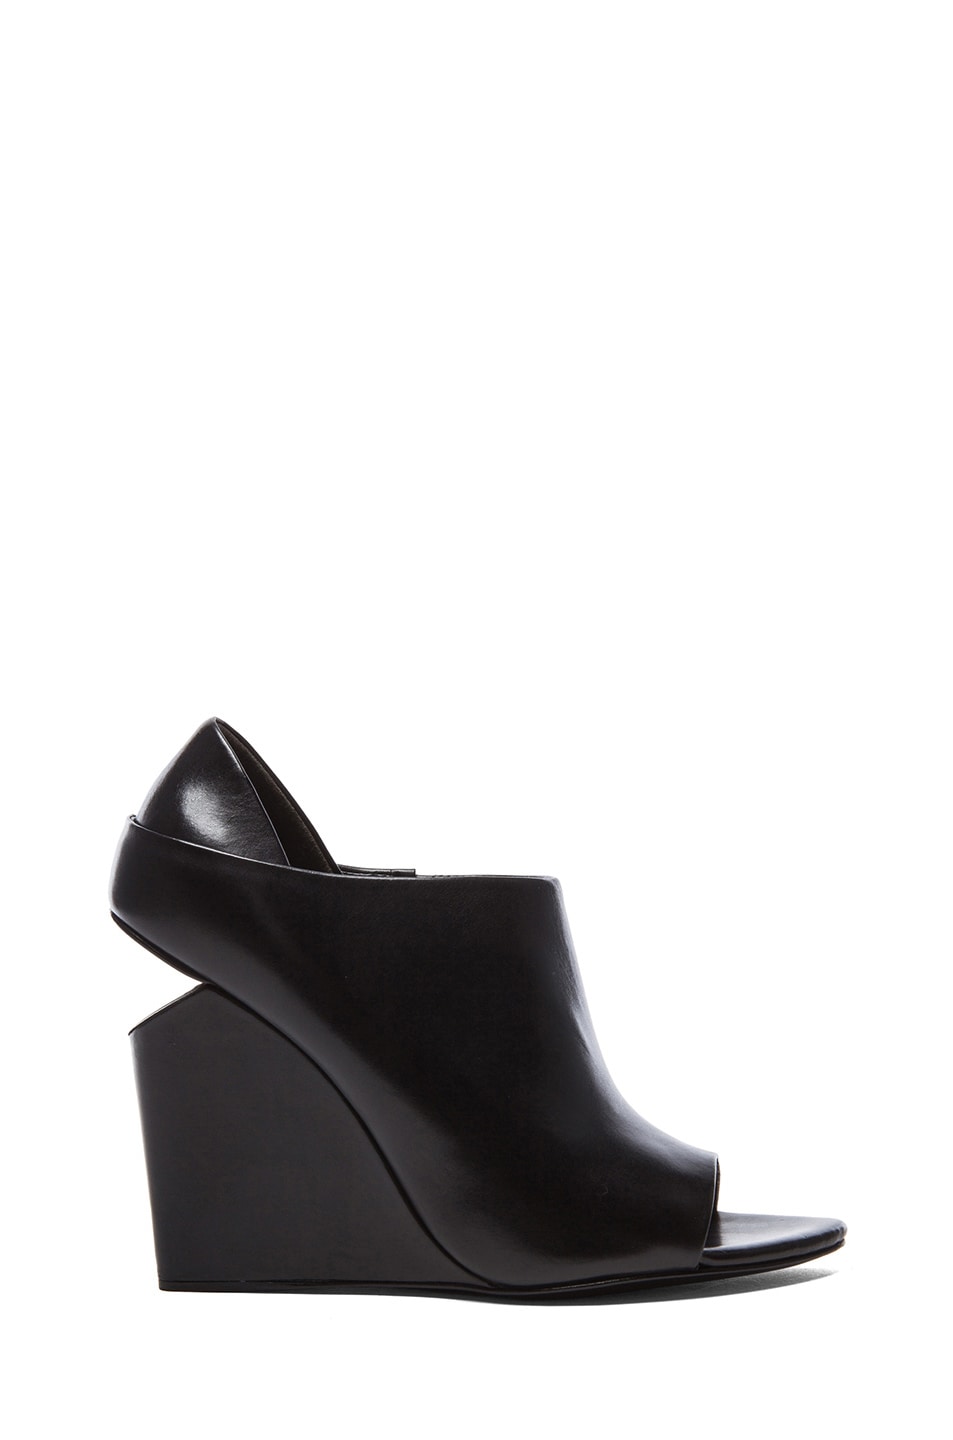 Image 1 of Alexander Wang Alla Leather Wedges in Black